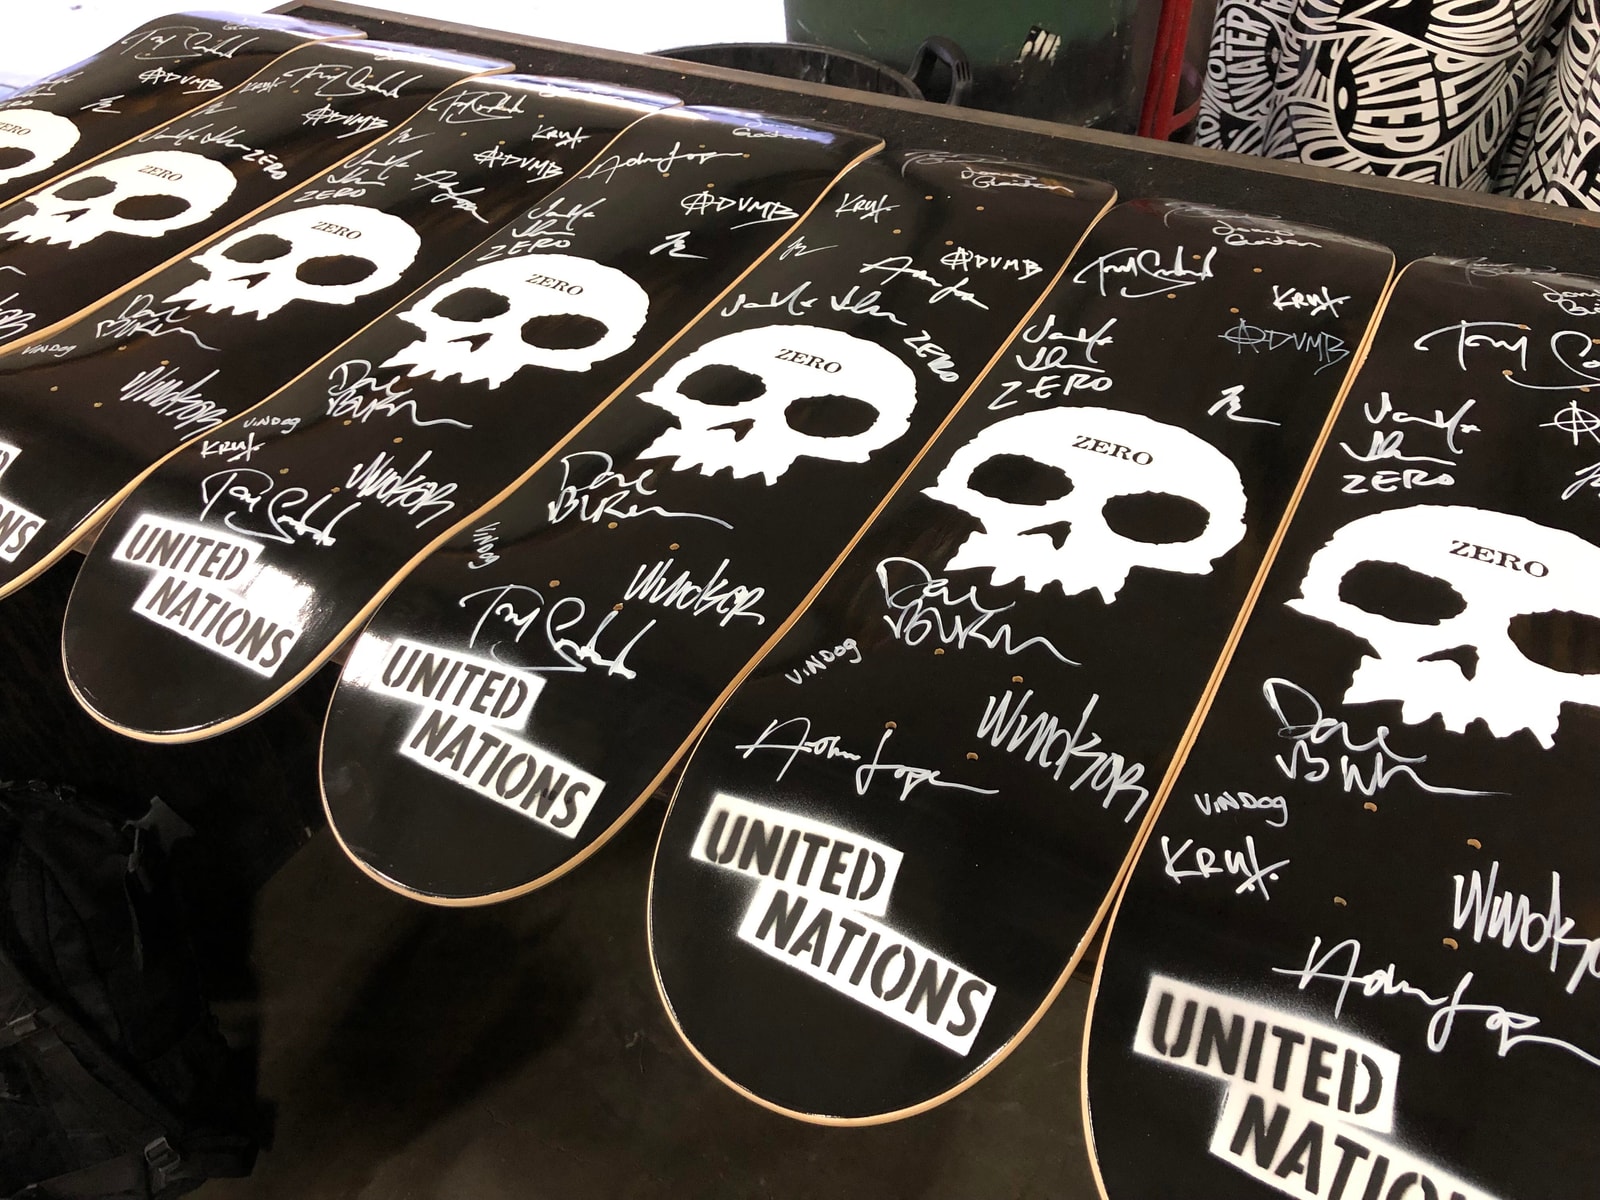 SIGNED ZERO UNITED NATIONS DECKS IN THE CANTEEN NOW